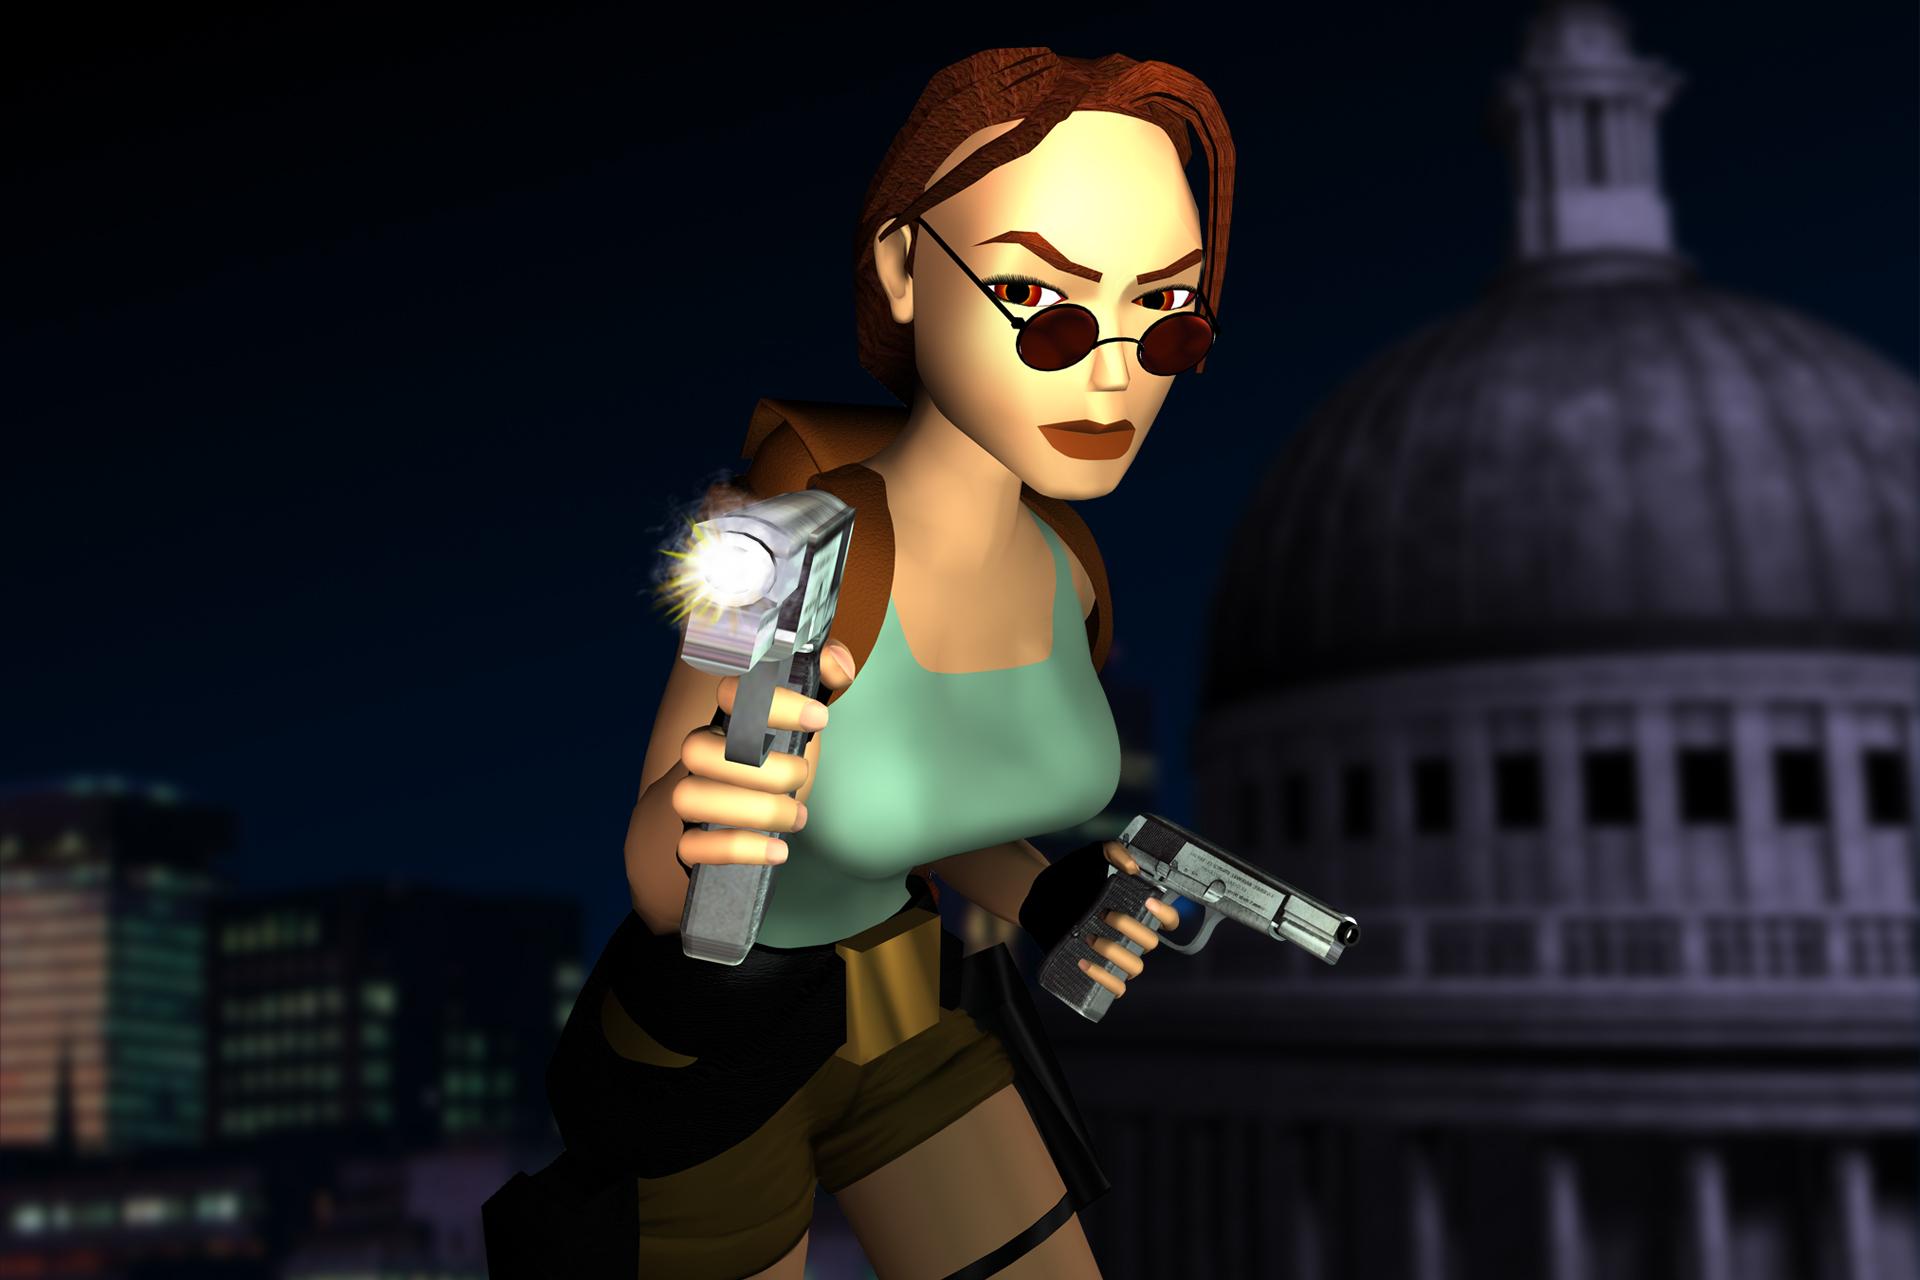 Lara Croft as depicted on the cover of Tomb Raider III.